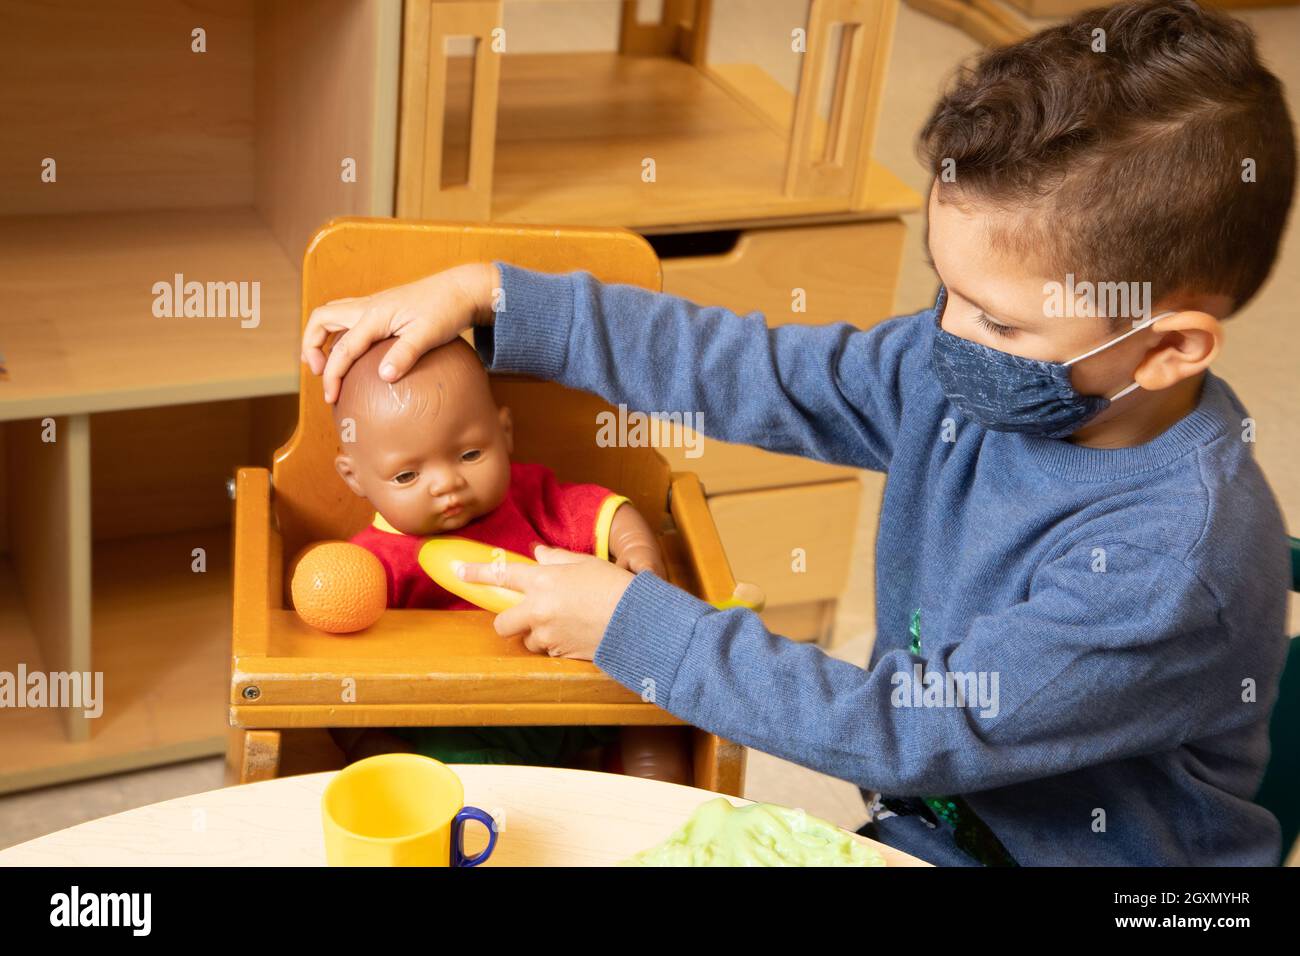 Education Preschool 3-4 year olds pretend play in family area, boy feeding doll with play food, wearing face mask to protect against Covid-19 Stock Photo